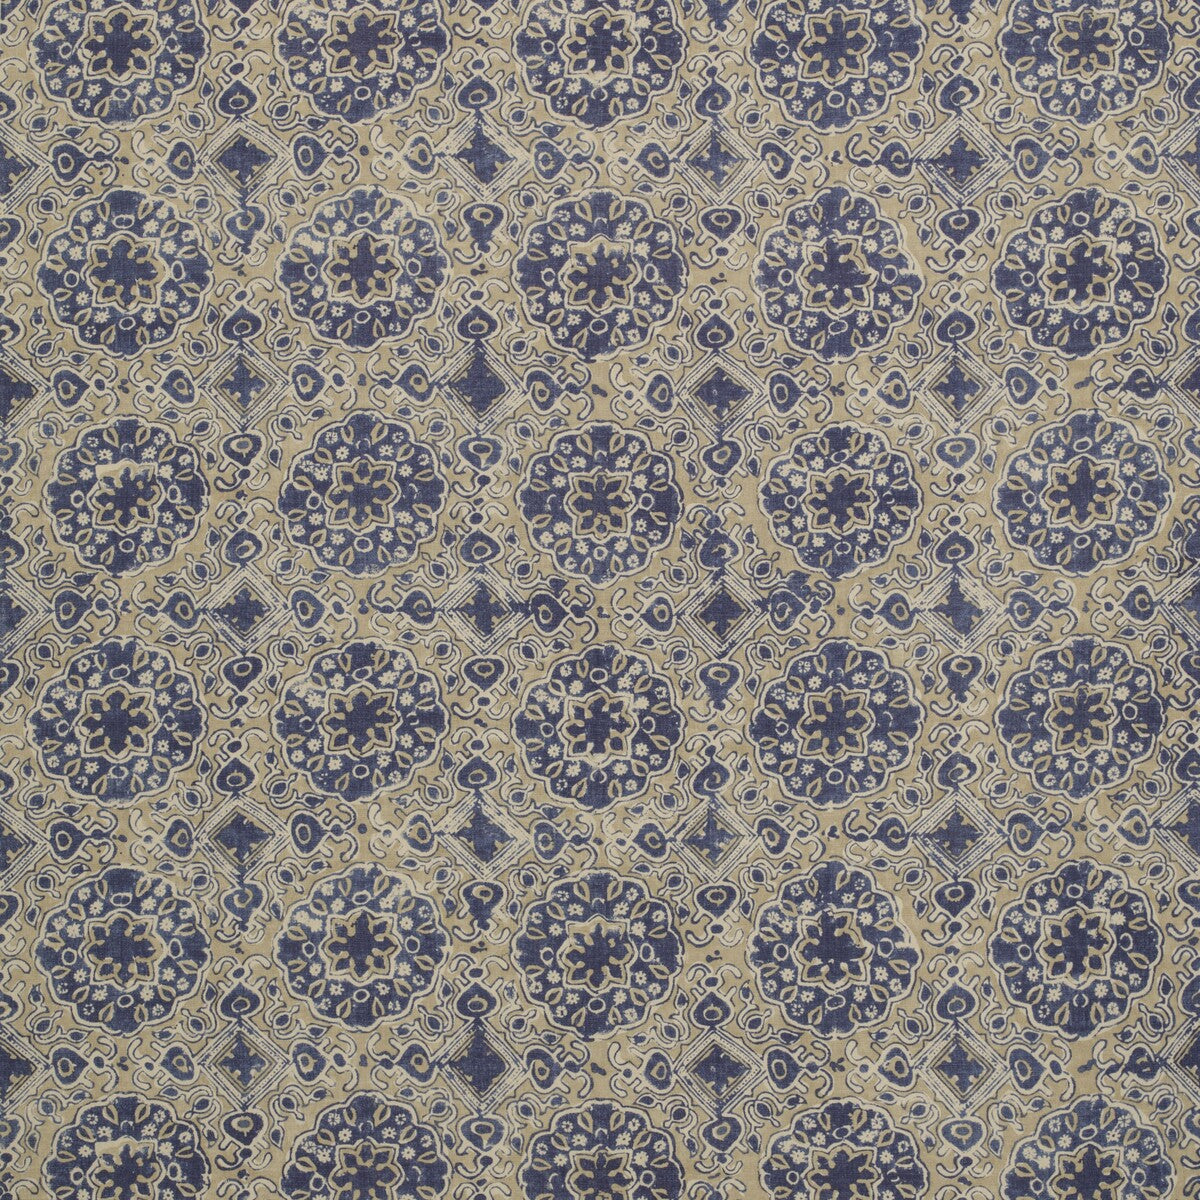 Ashcombe fabric in sand/blue color - pattern BFC-3652.165.0 - by Lee Jofa in the Blithfield collection